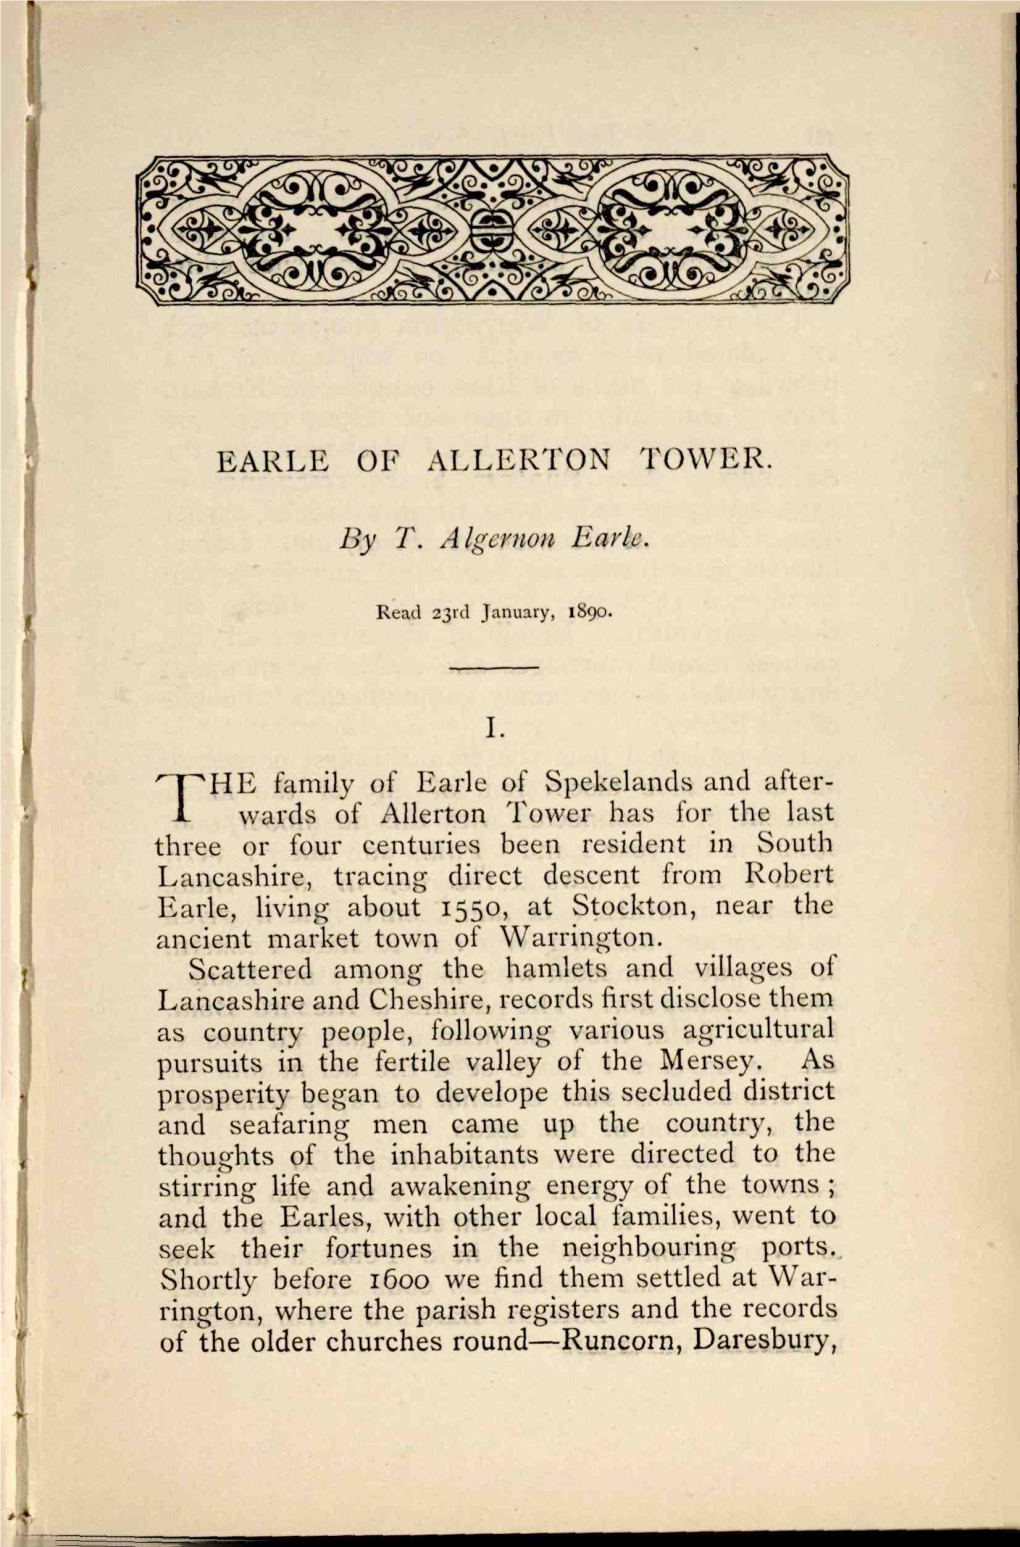 Earle of Allerton Tower